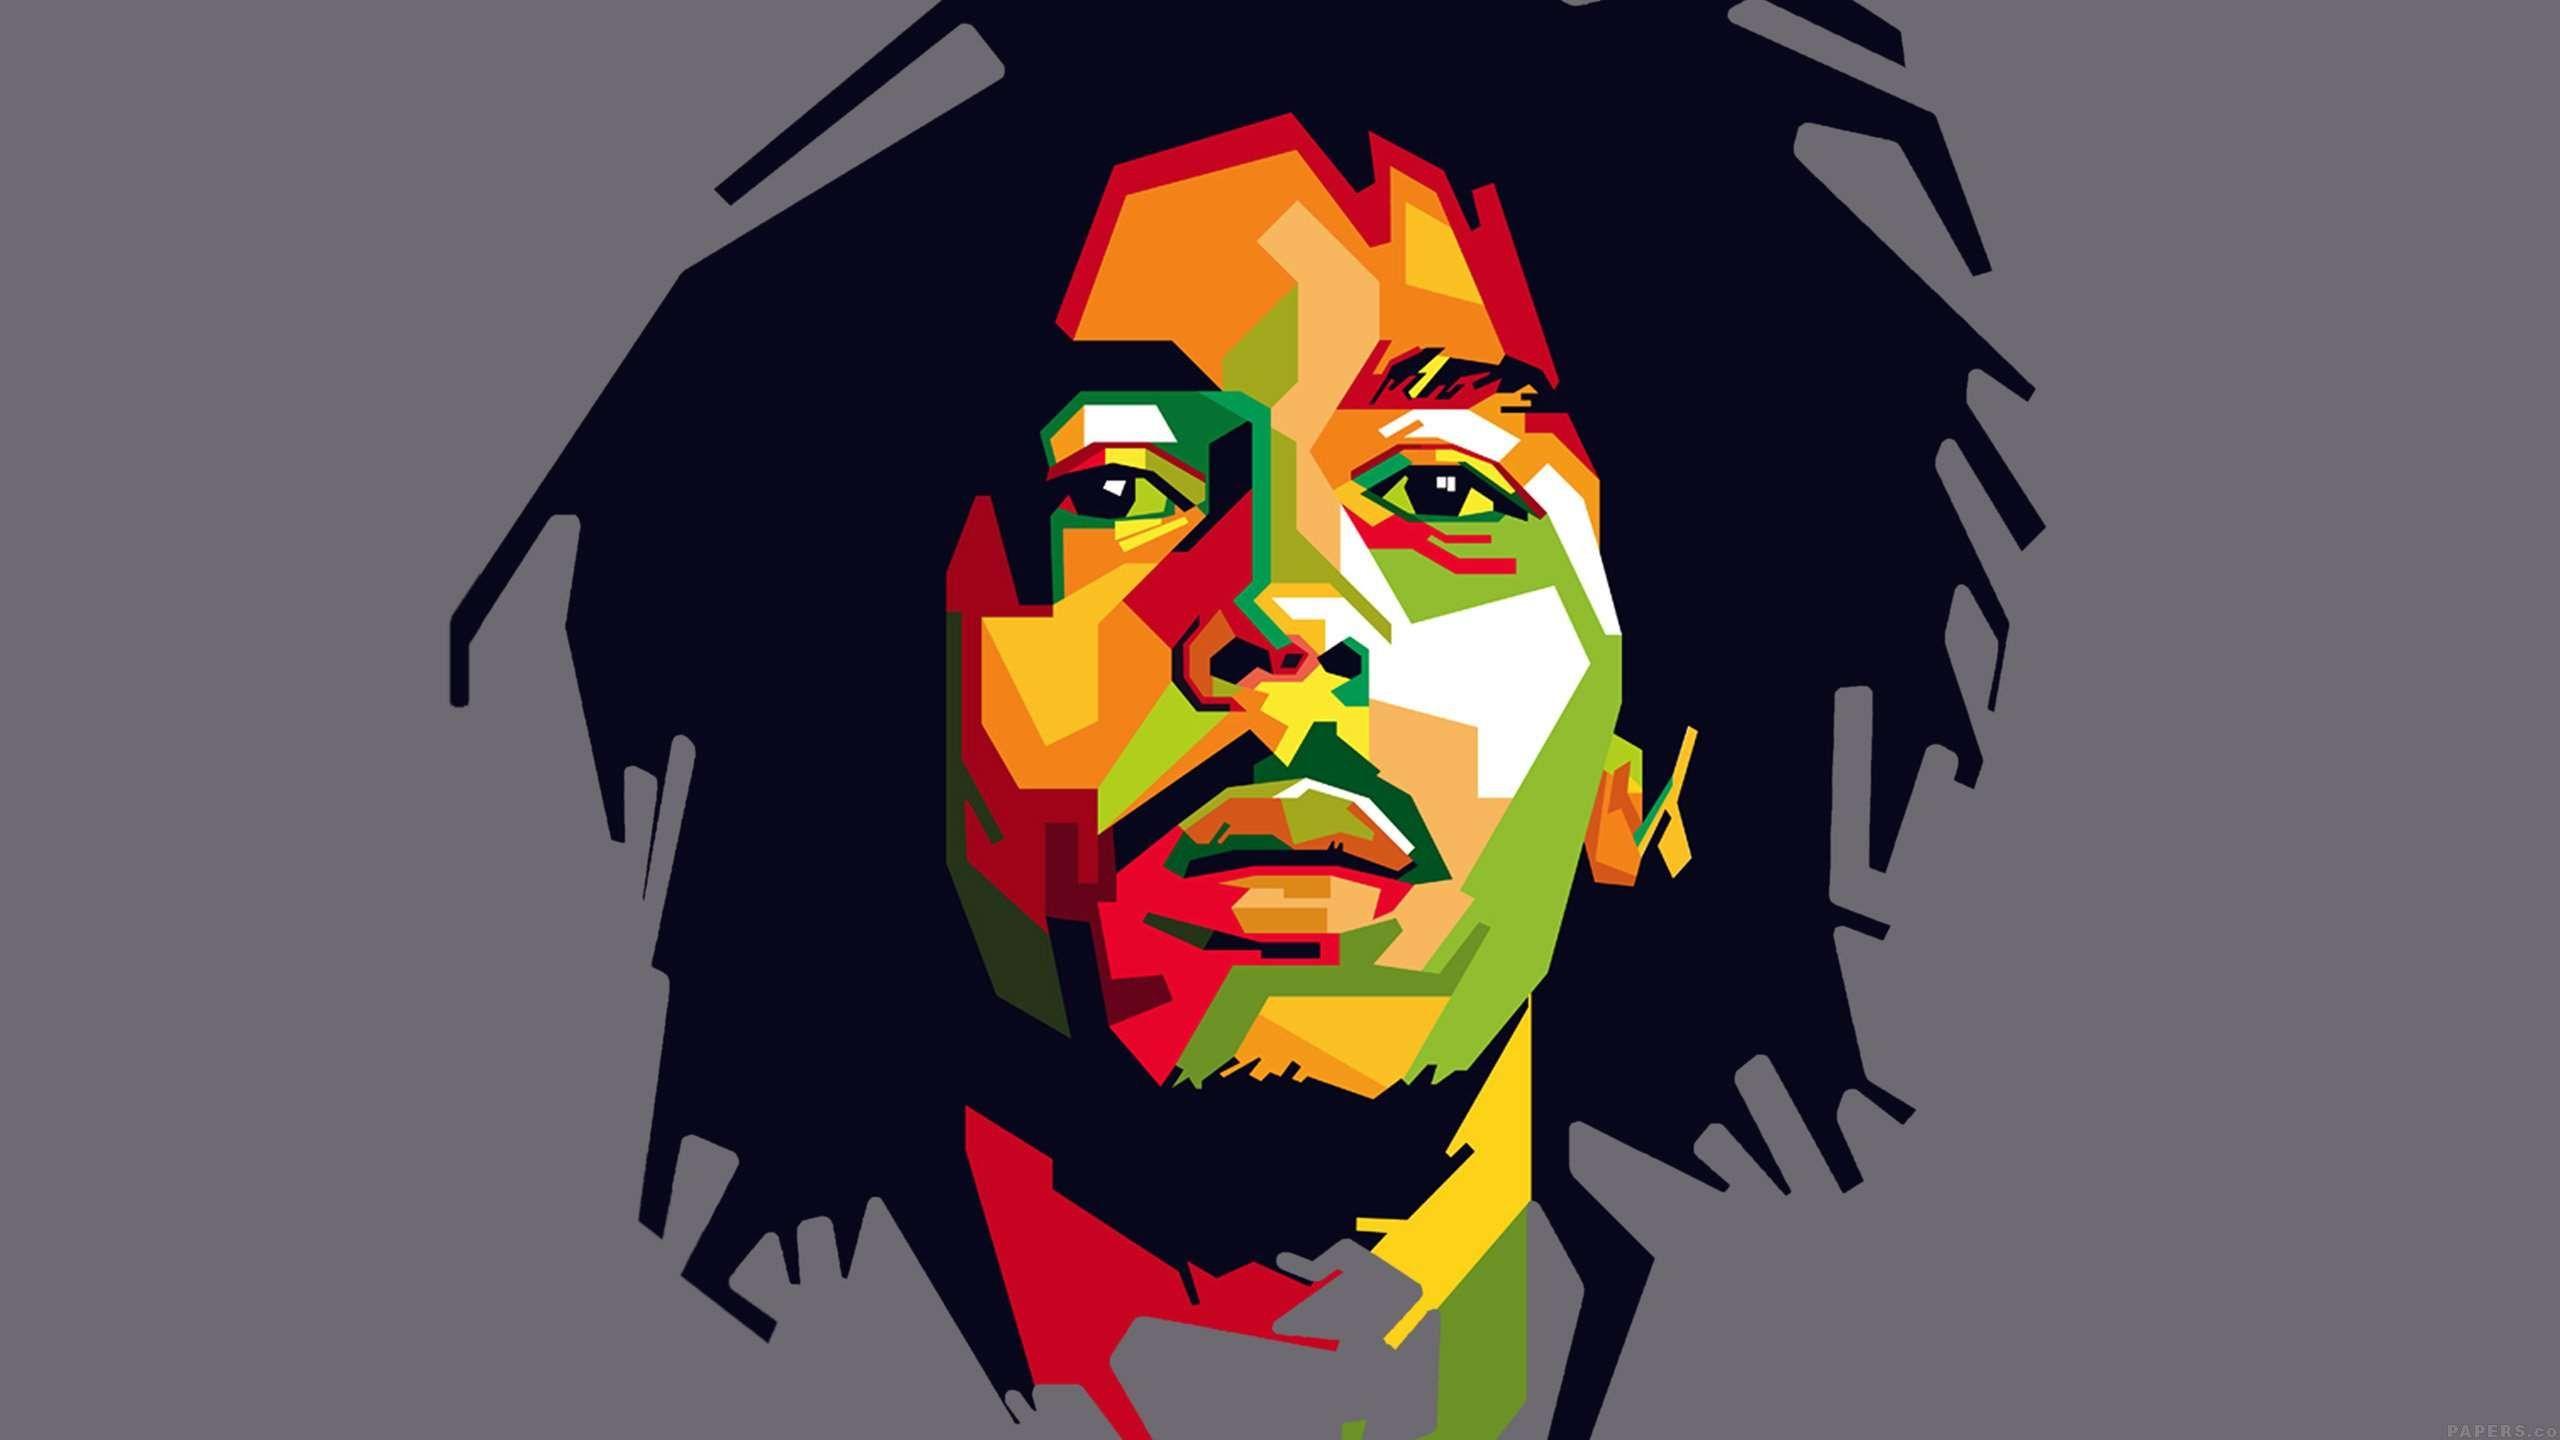 Wallpaper Bob Marley Collection For Free Download. HD Wallpaper